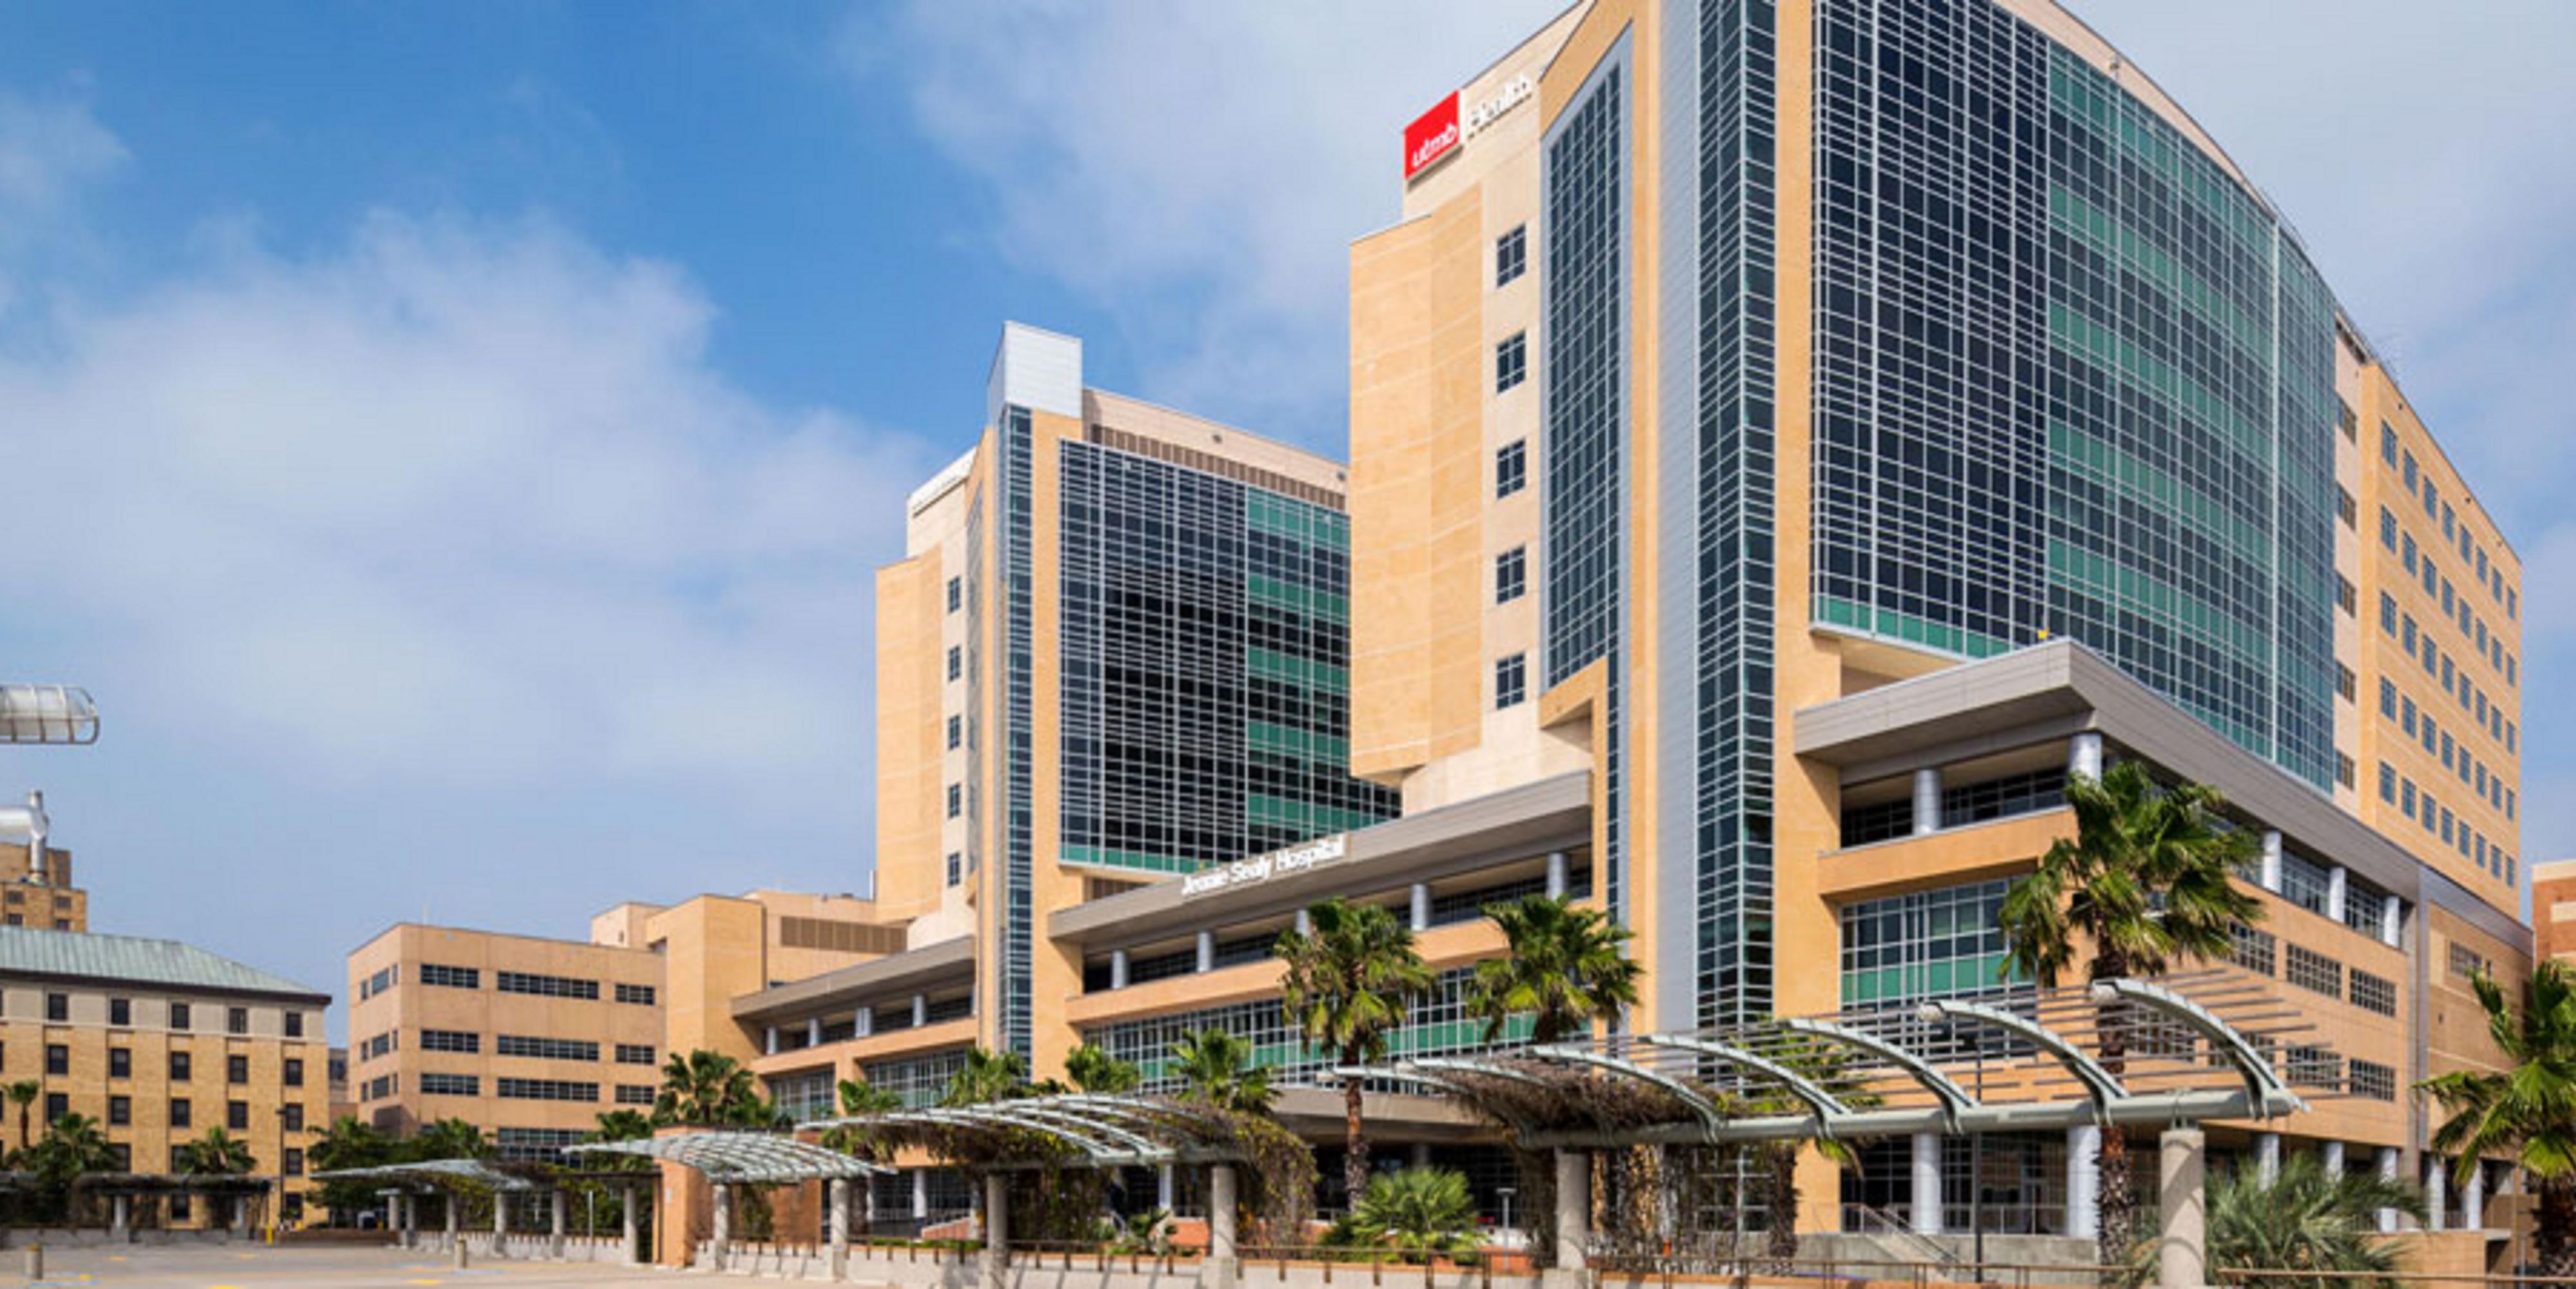 UTMB & Shriner's has stood with Galveston for many years, providing health care for Texans and their families.  Our hotel offers preferred rates to traveling nurses, researchers, pharmaceutical sales reps, UTMB vendors, and more. For booking information or  project rates, contact hotel sales at 409.621.5100.